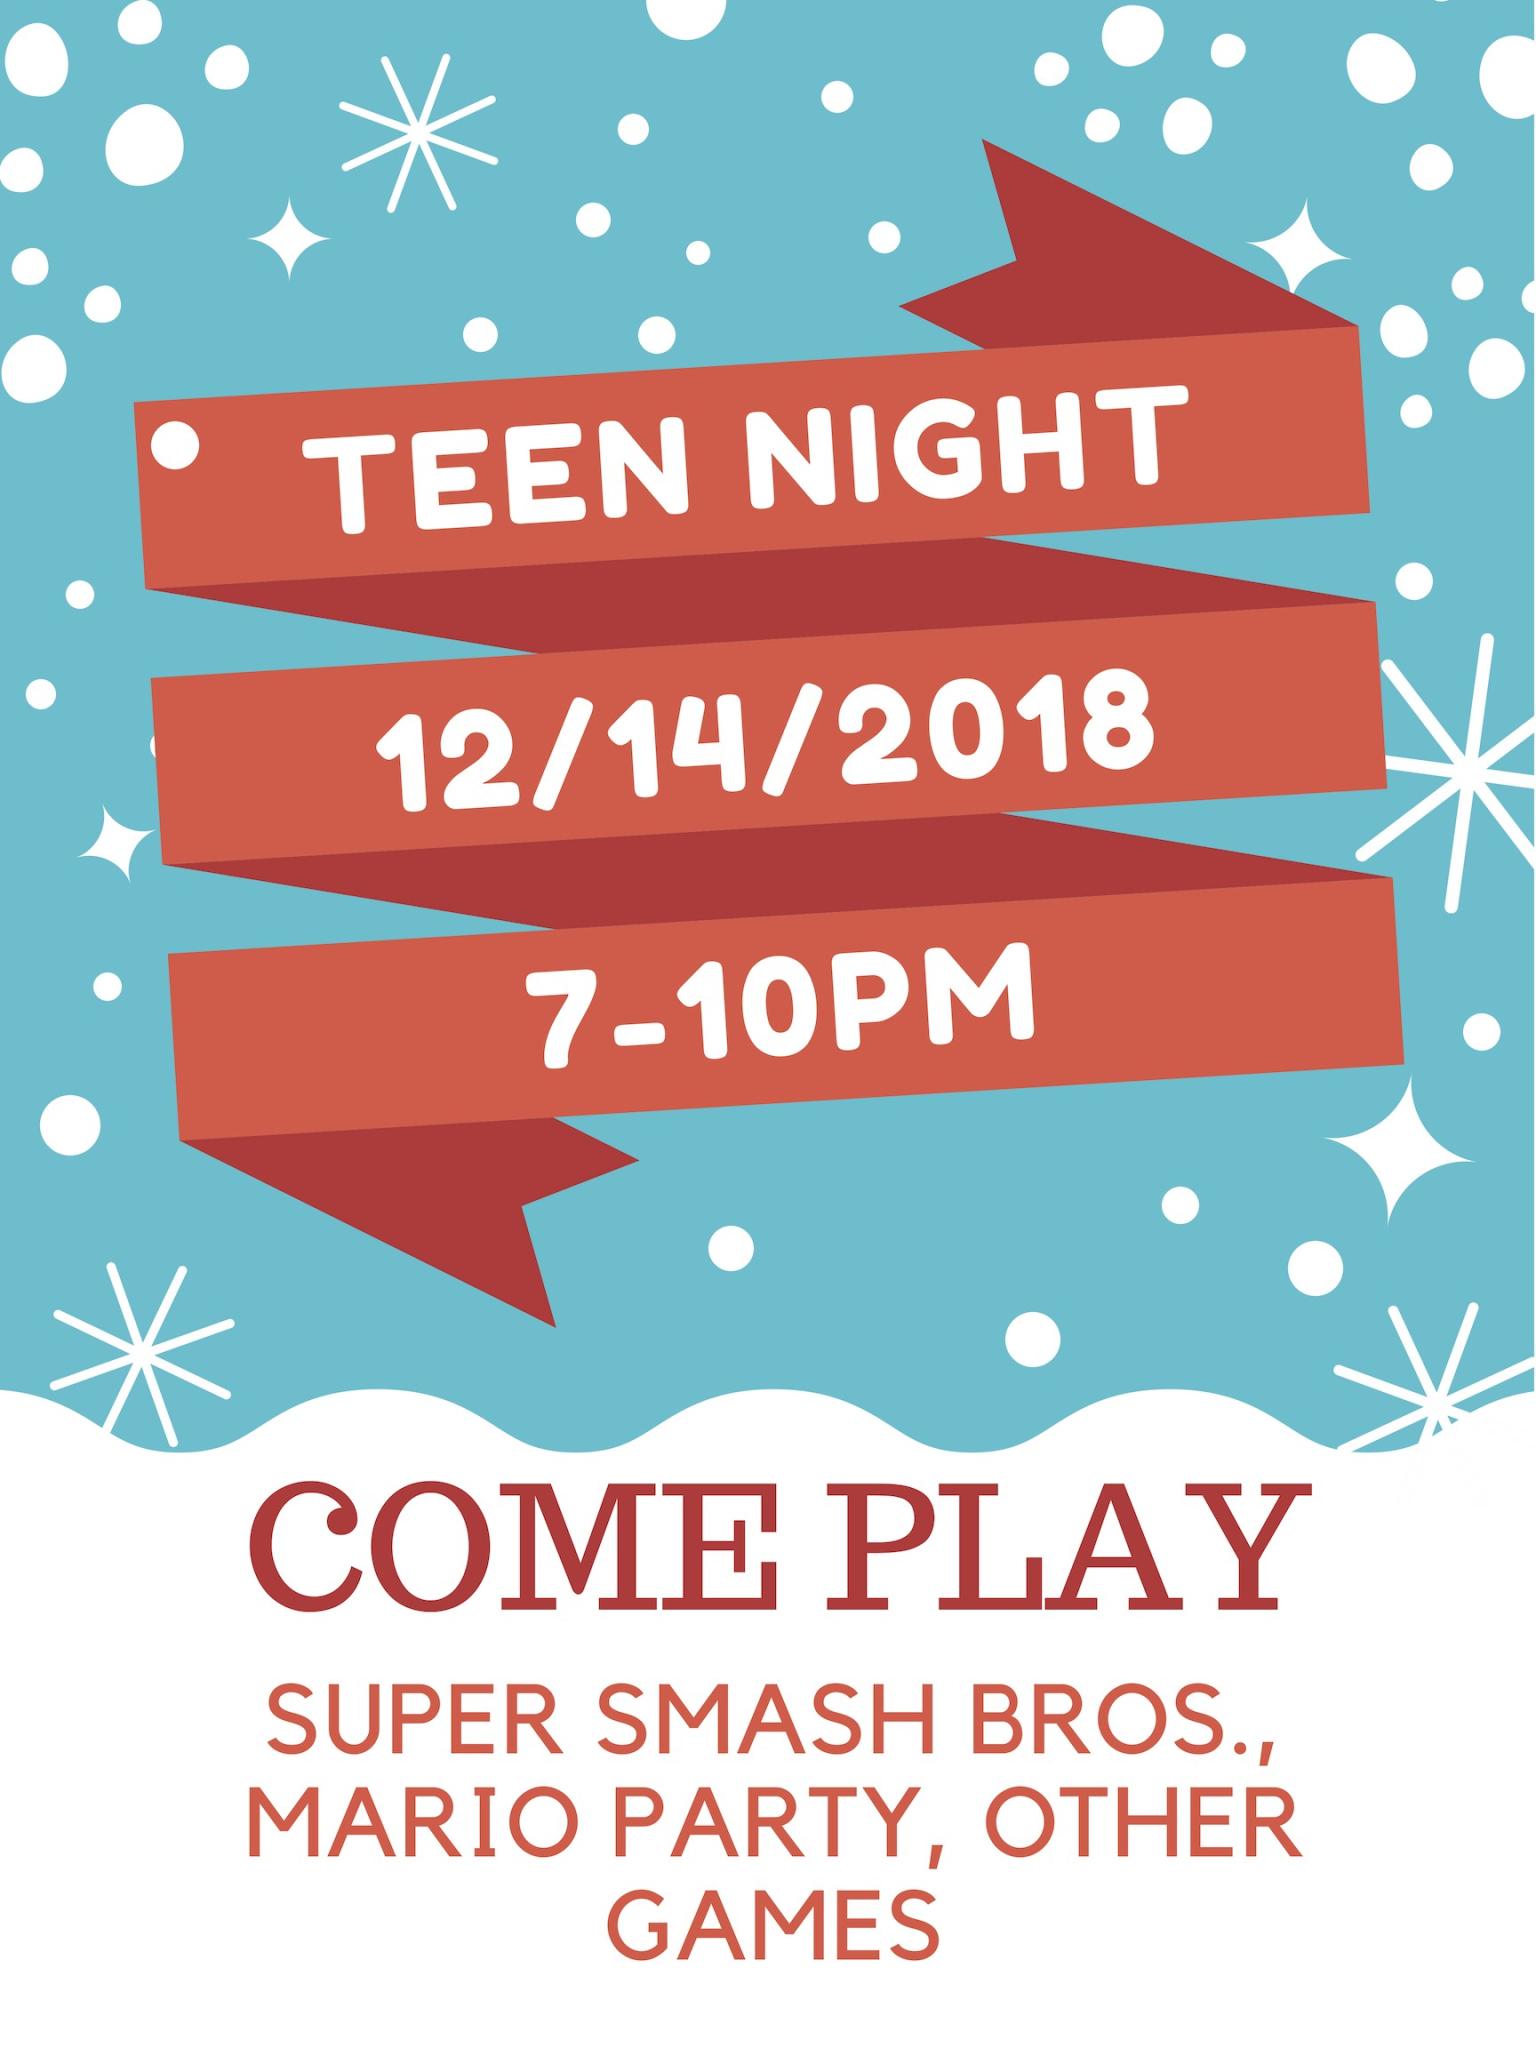 Patterson Library's Teen Night